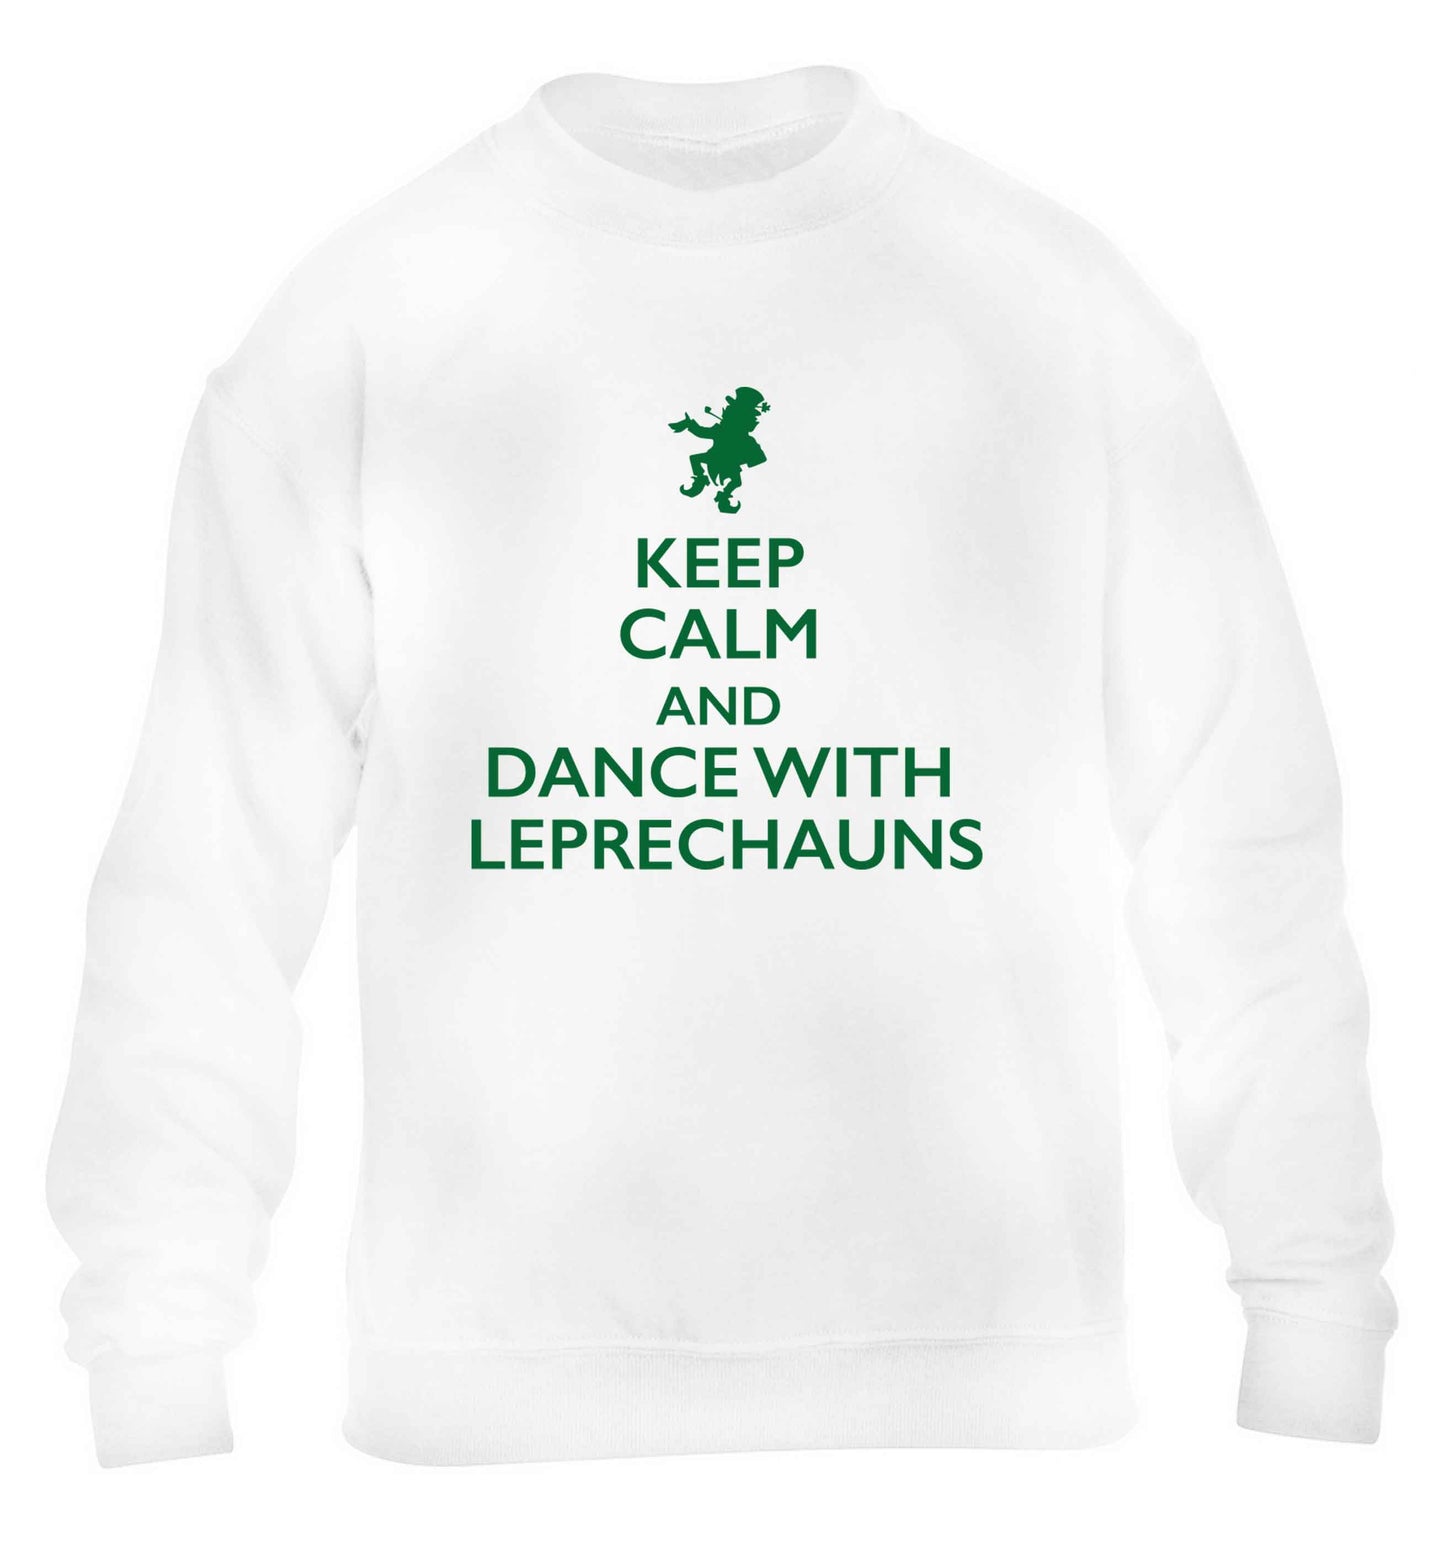 Keep calm and dance with leprechauns children's white sweater 12-13 Years